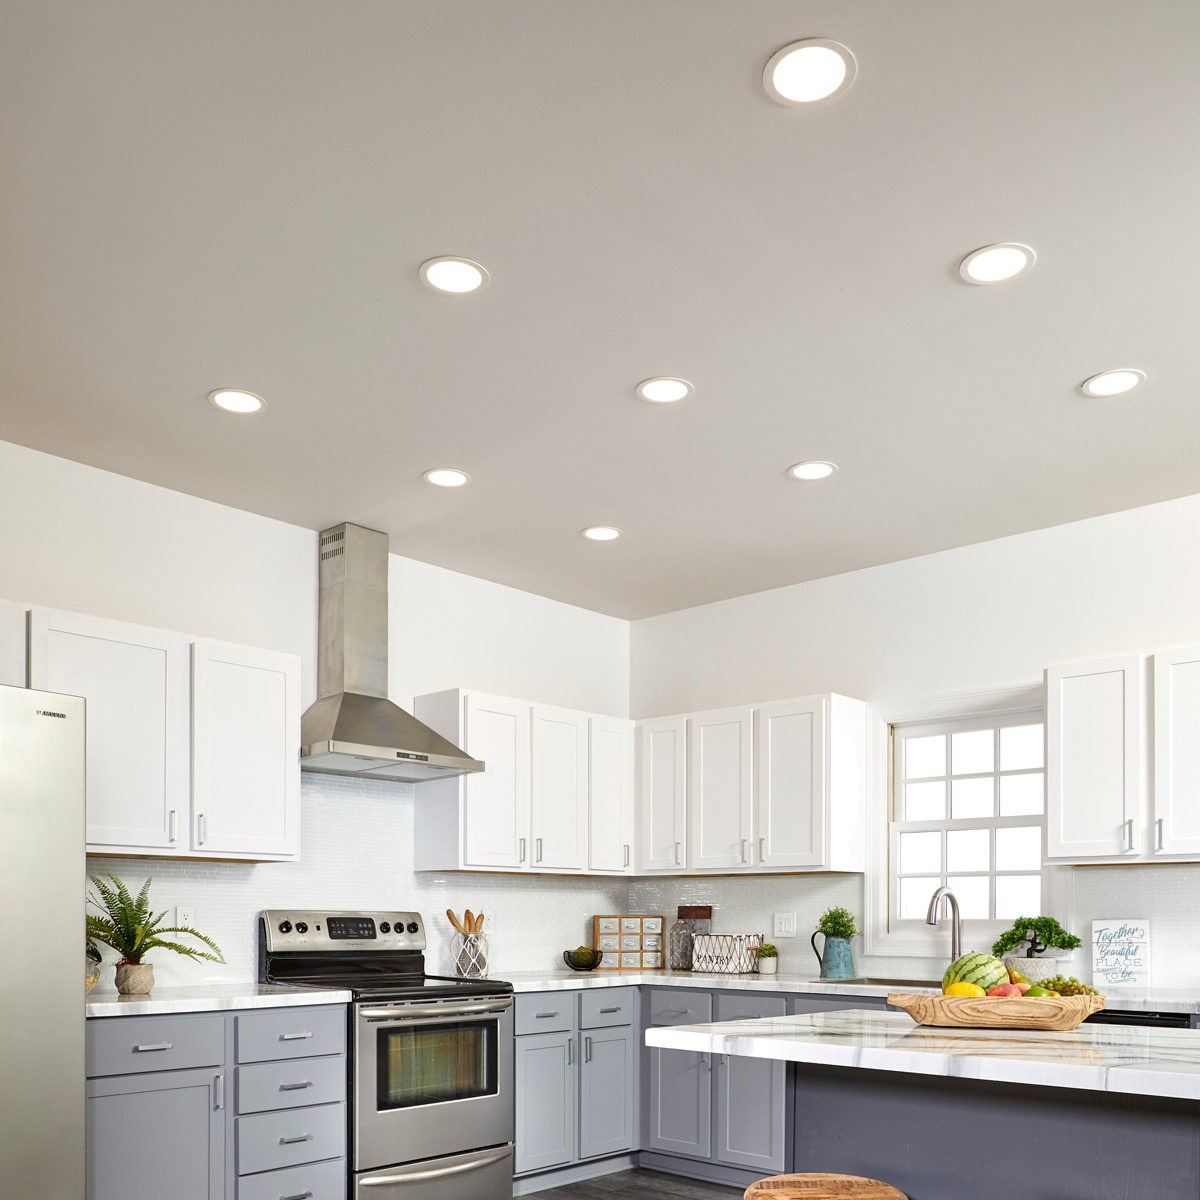 Led Lighting For Kitchens
 How to Install Low Profile LED Lights in Your Kitchen